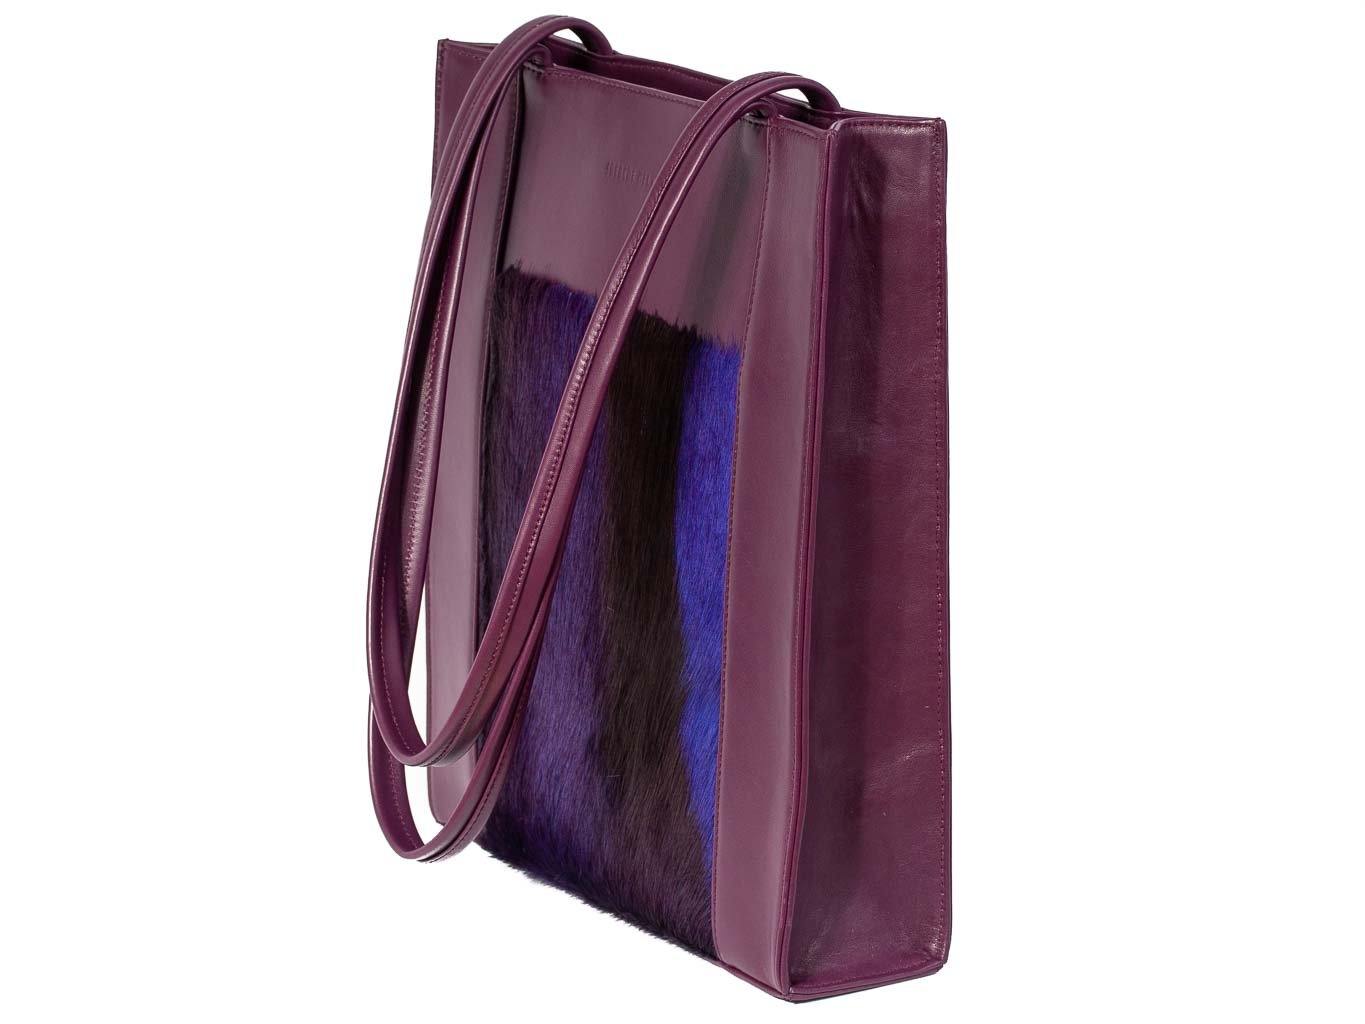 Tote Springbok Handbag in Deep Purple with a stripe feature by Sherene Melinda front handle